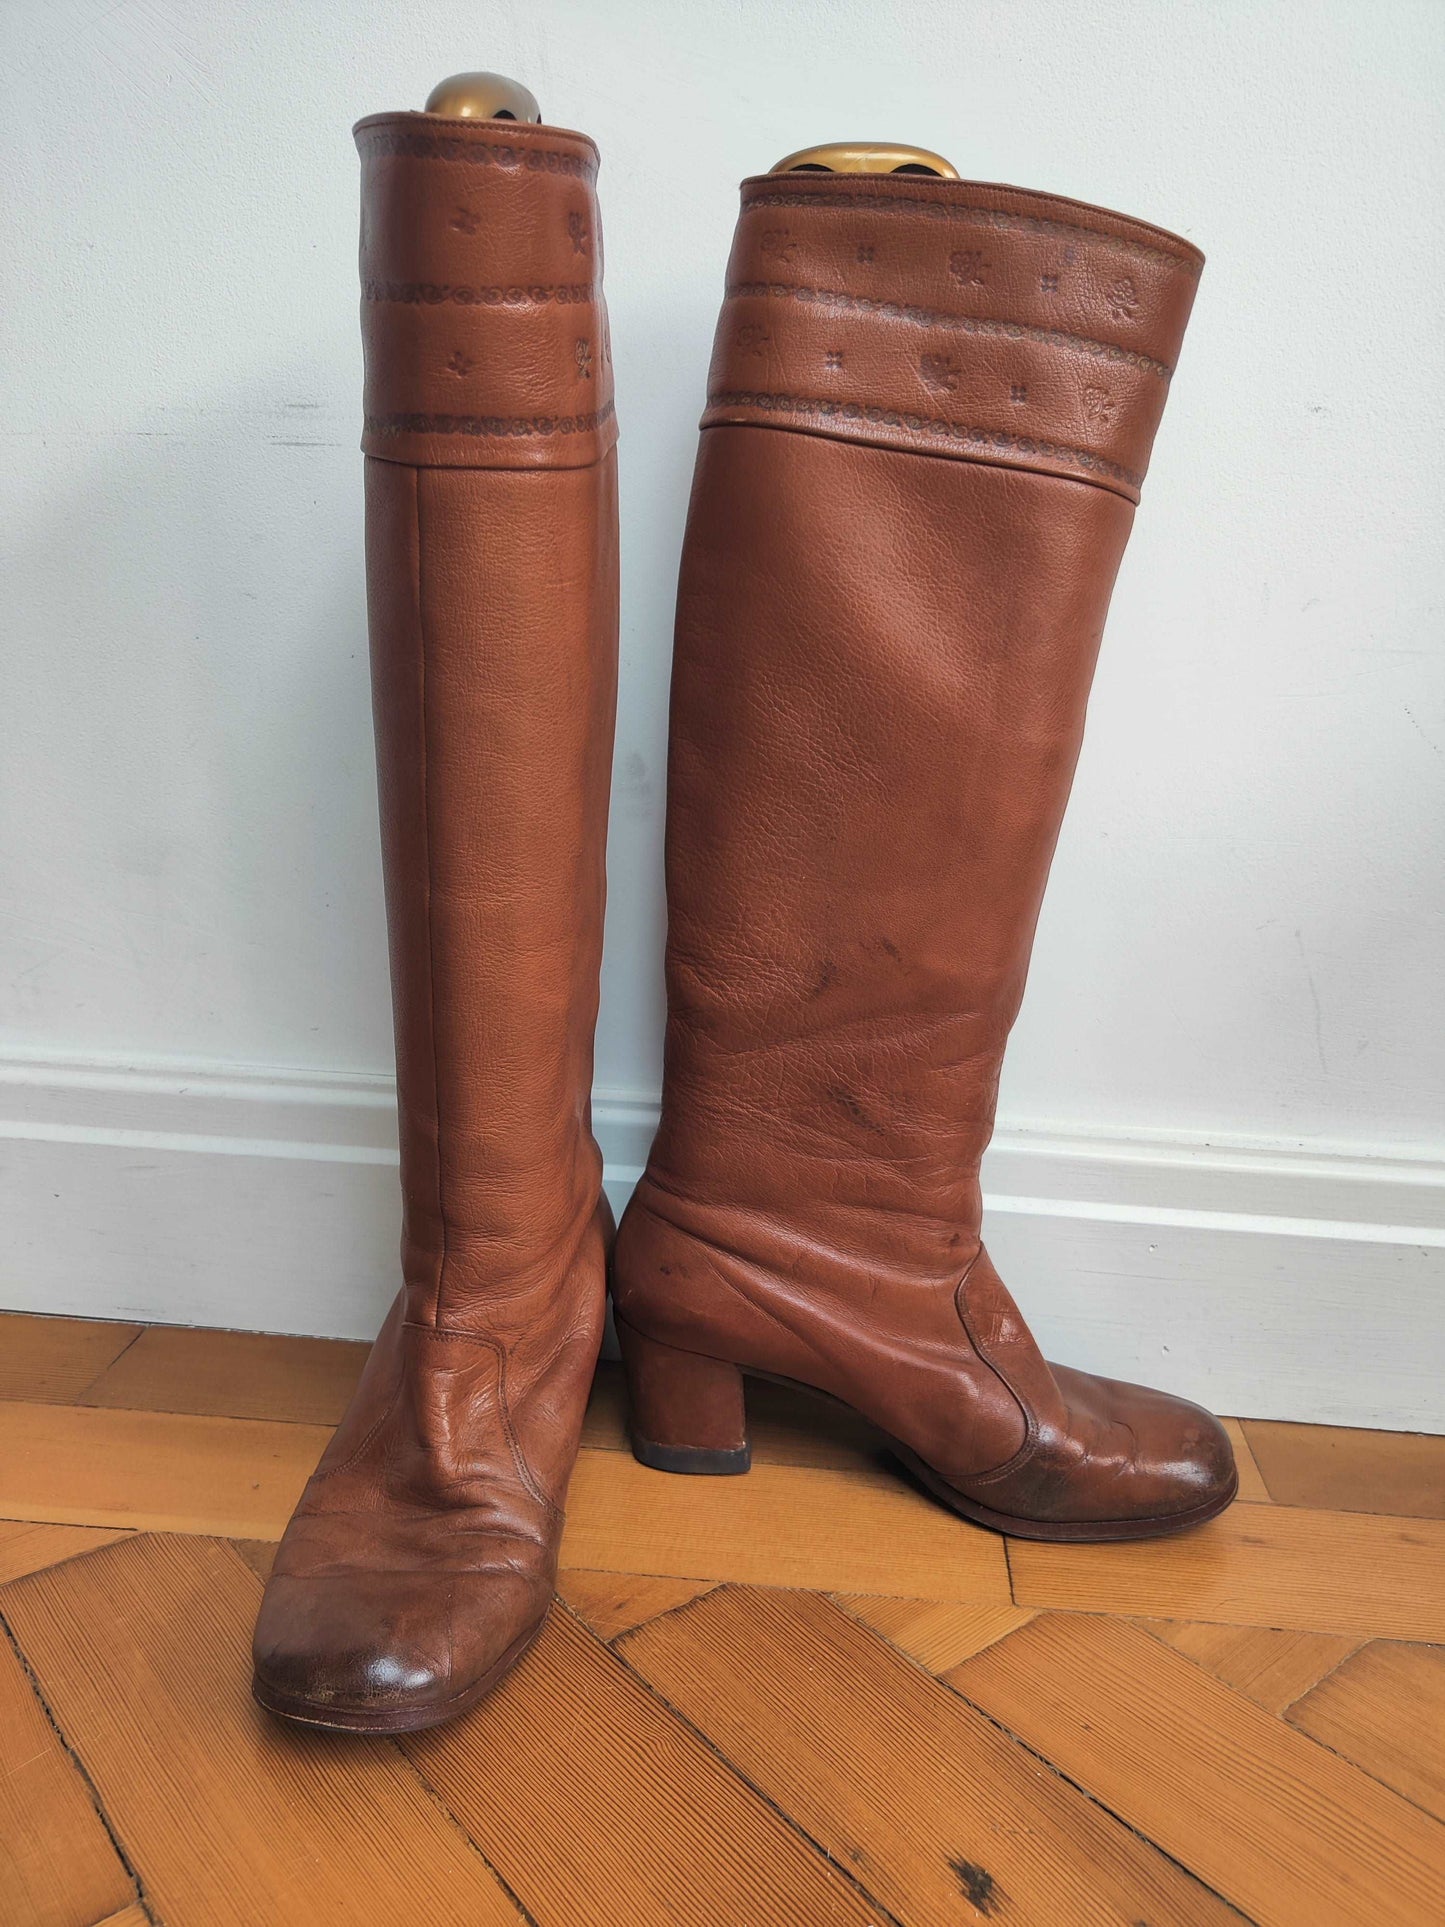 Size 5 go go boots. tan leather.